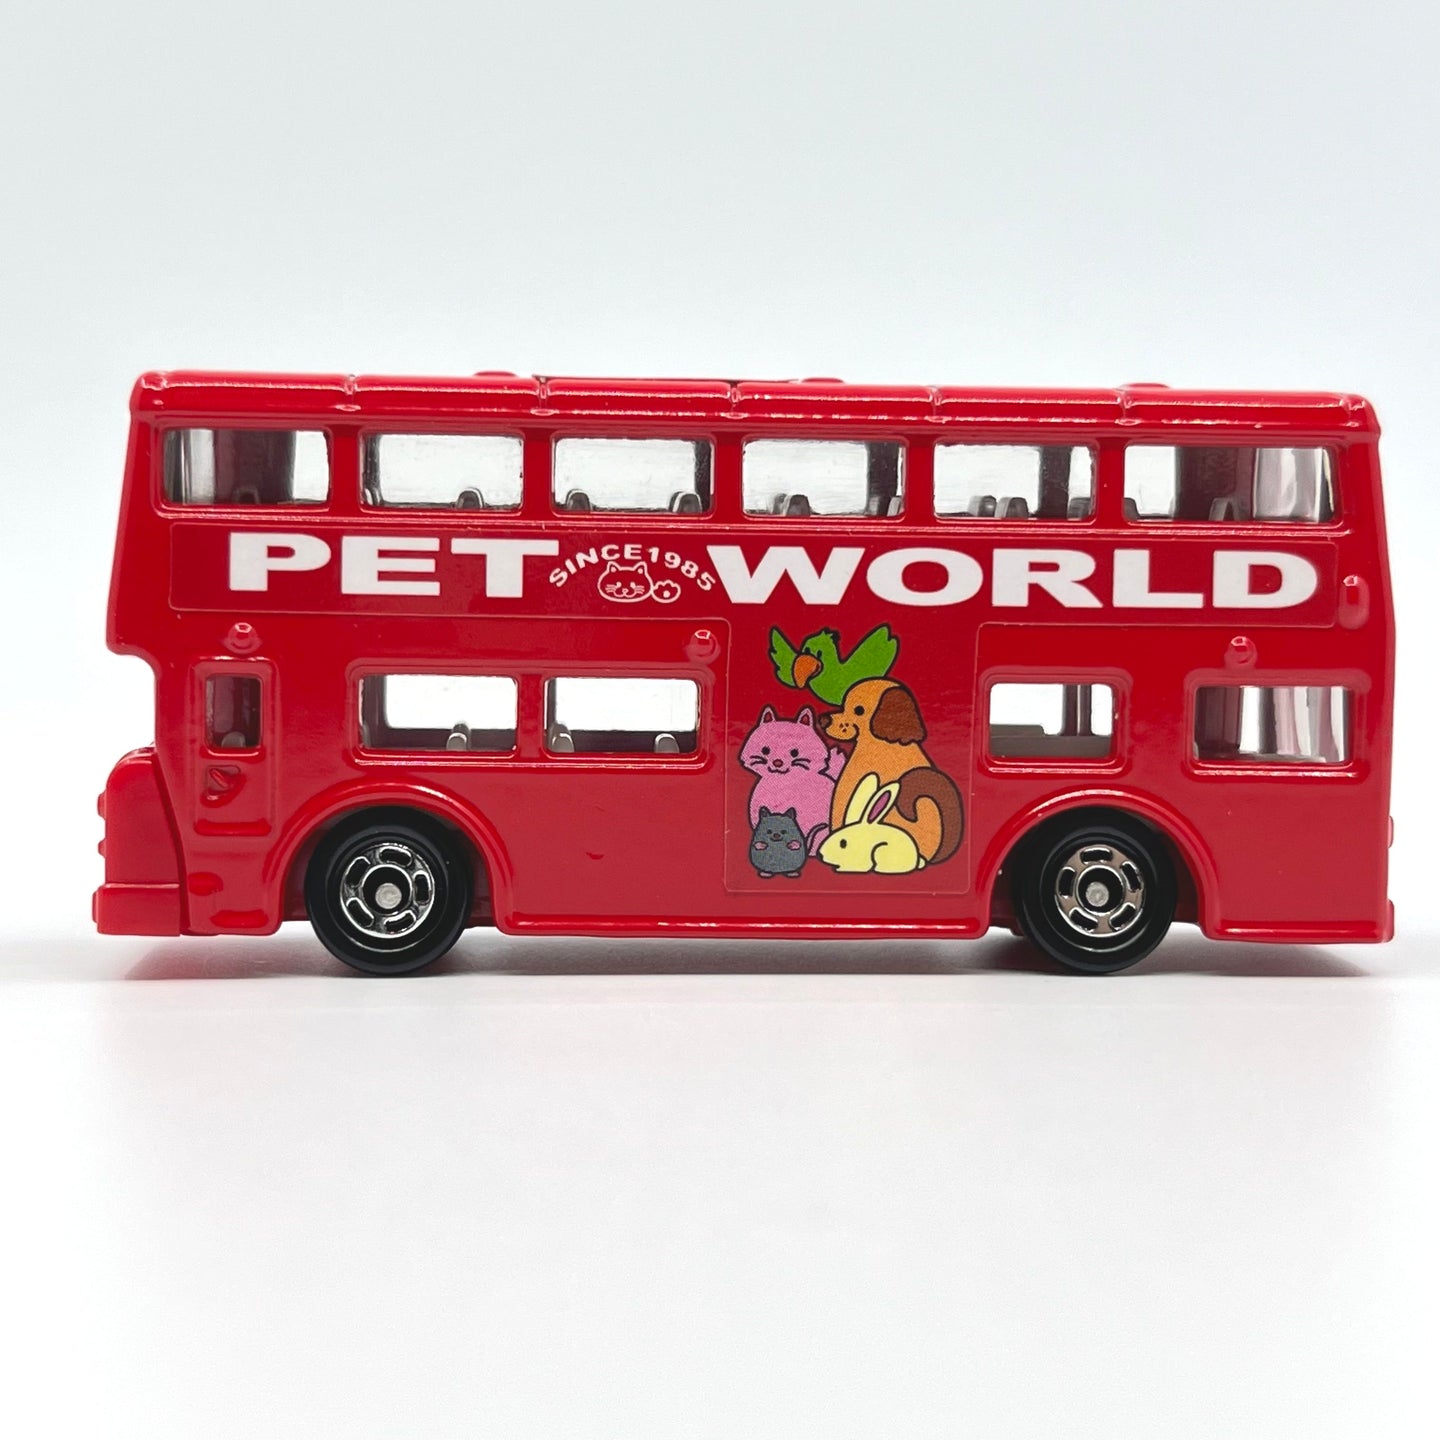 1:130 Classic London Bus Alloy Tomica Diecast Car Model by Takara Tomy